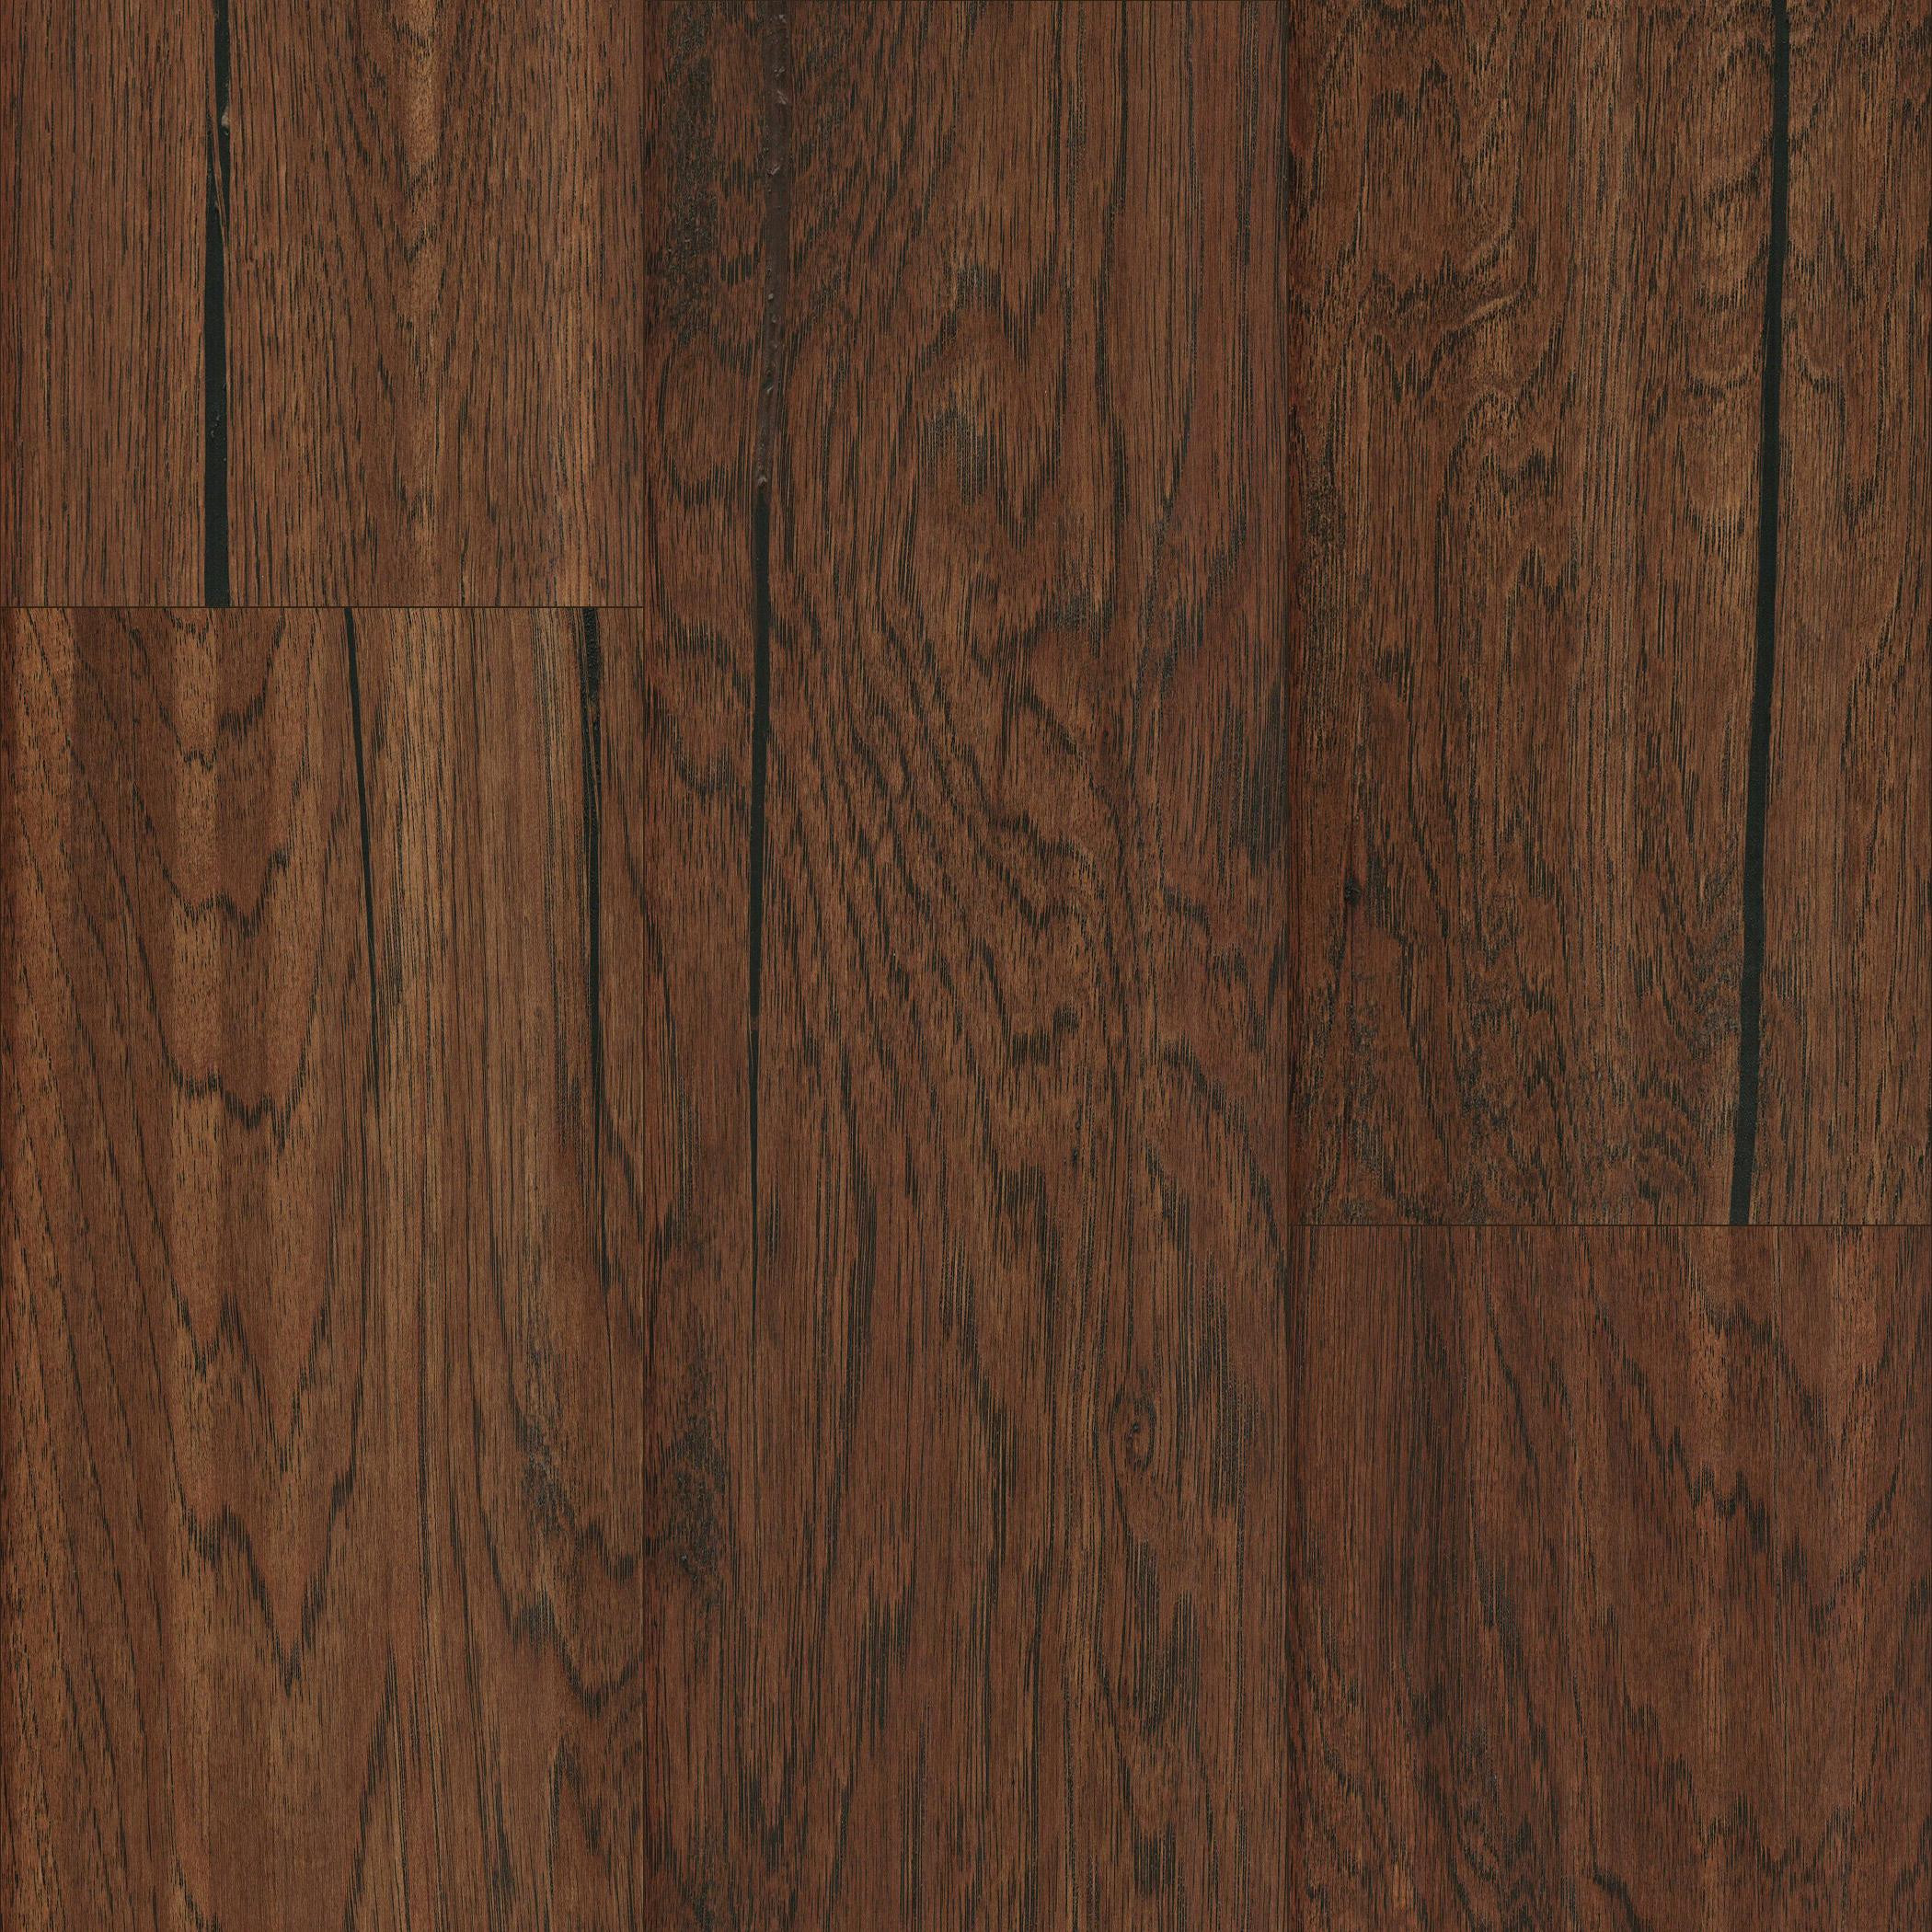 19 attractive Glue Down Hardwood Floor 2023 free download glue down hardwood floor of mullican san marco hickory provincial 7 sculpted engineered pertaining to mullican san marco hickory provincial 7 sculpted engineered hardwood flooring